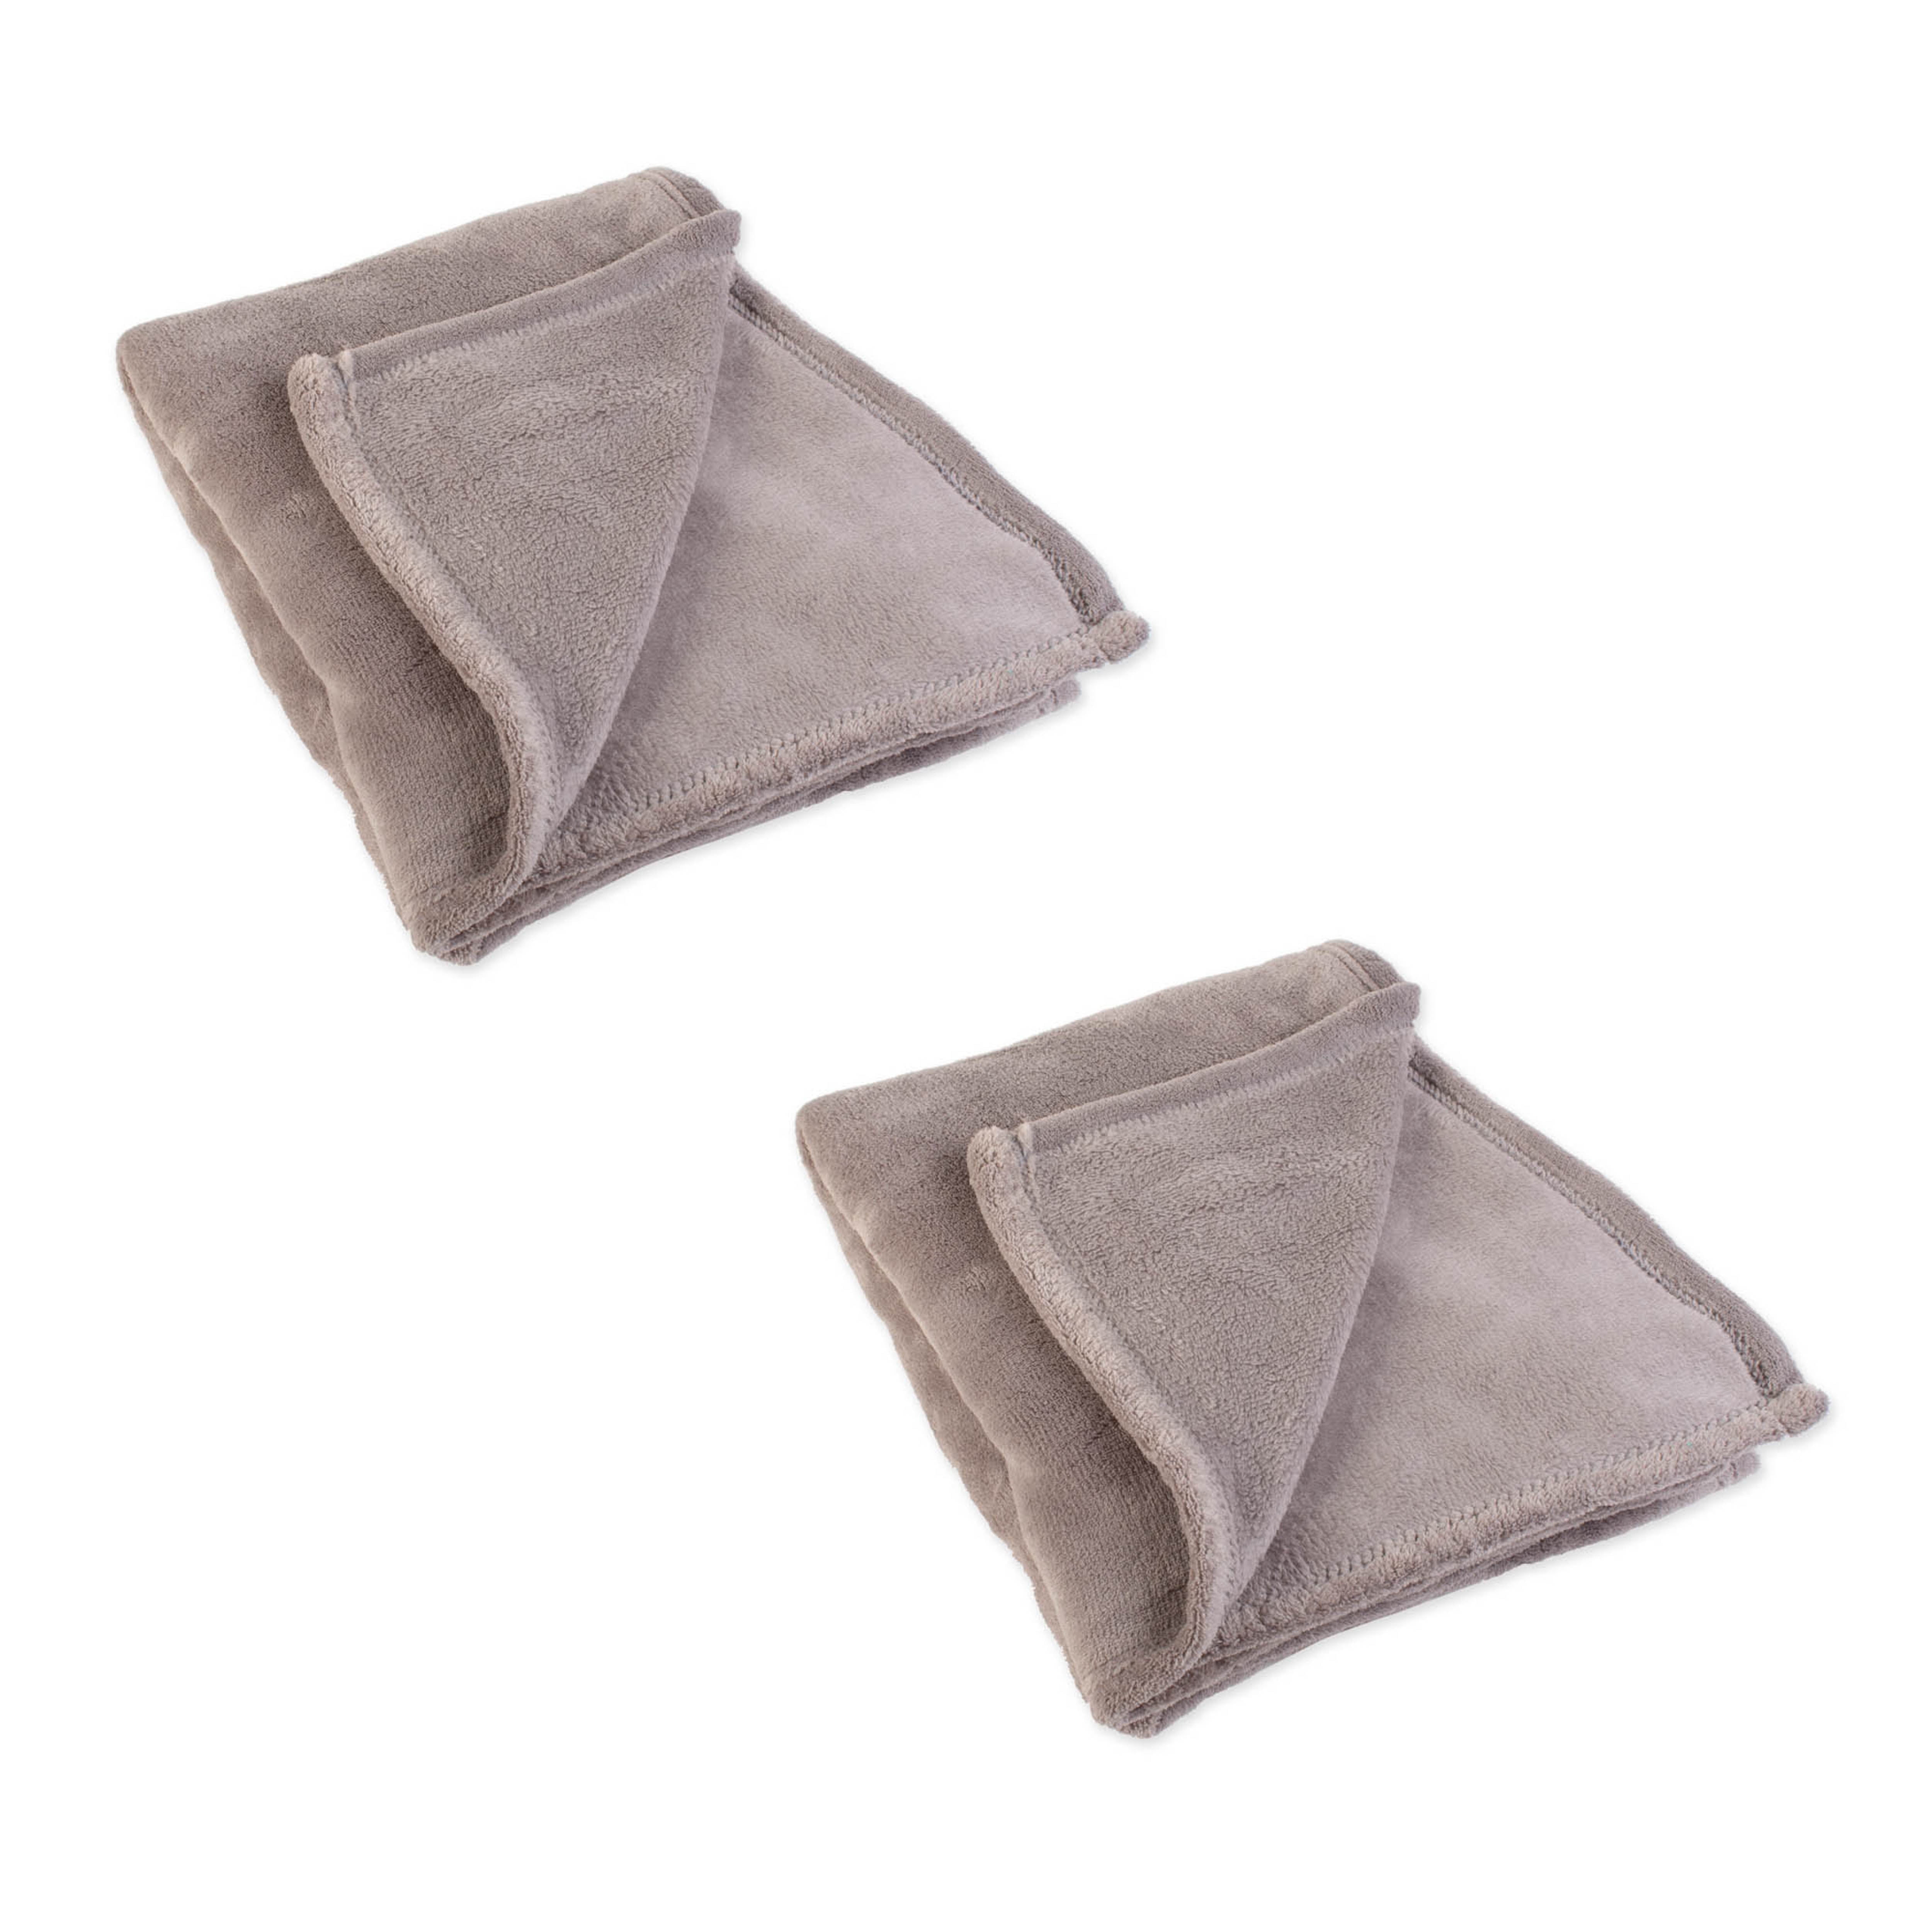 70115a Solid Zinc Plush Fleece Throw, 50 X 60 In. - Pack Of 2